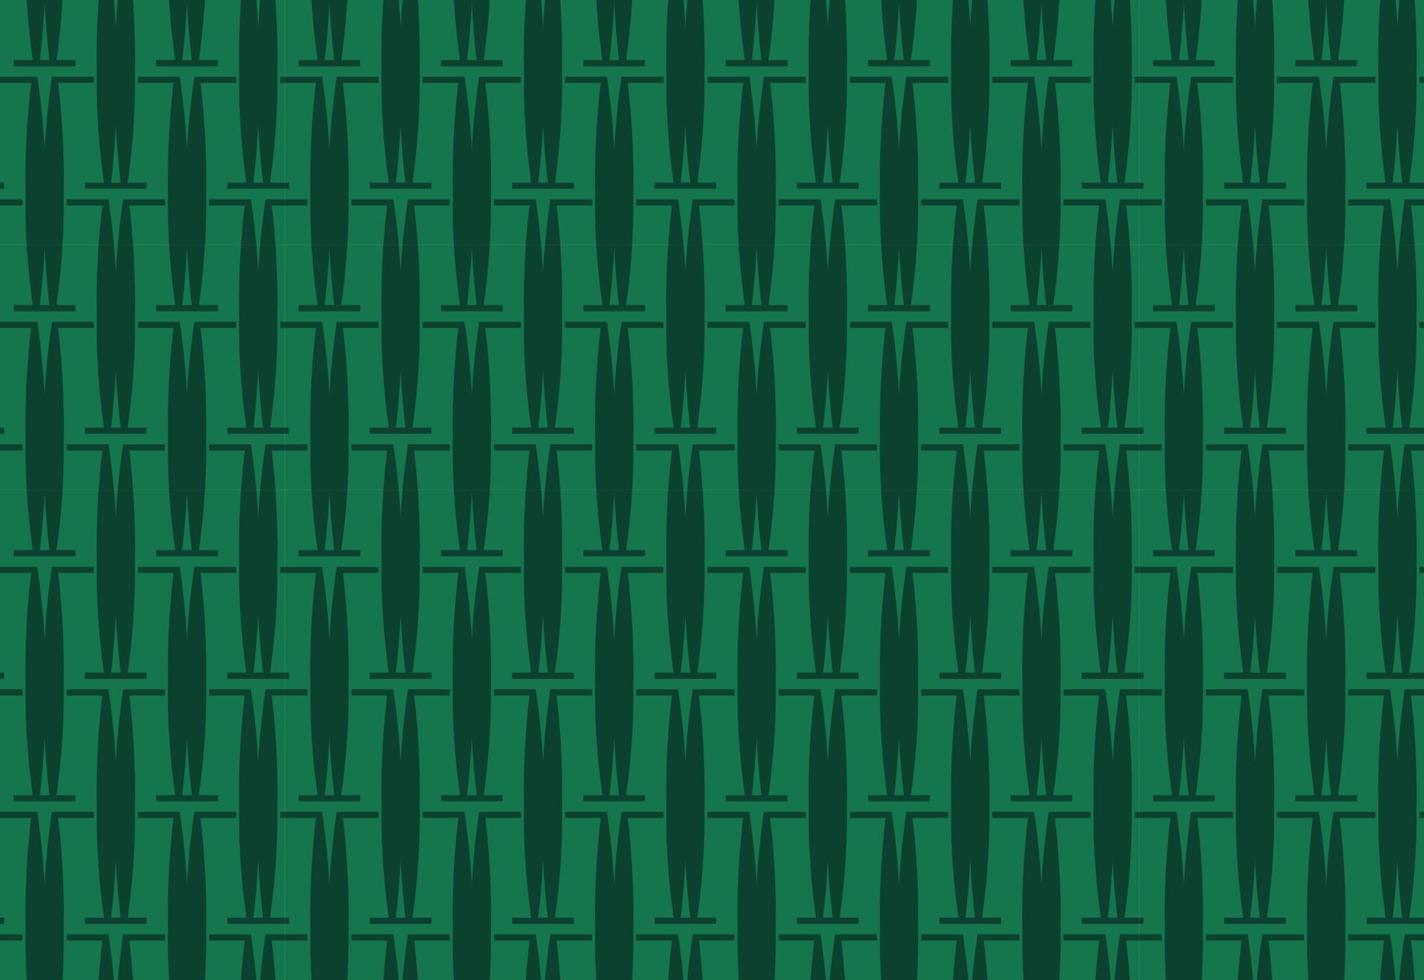 Vector seamless pattern, abstract texture background, repeating tiles, two colors